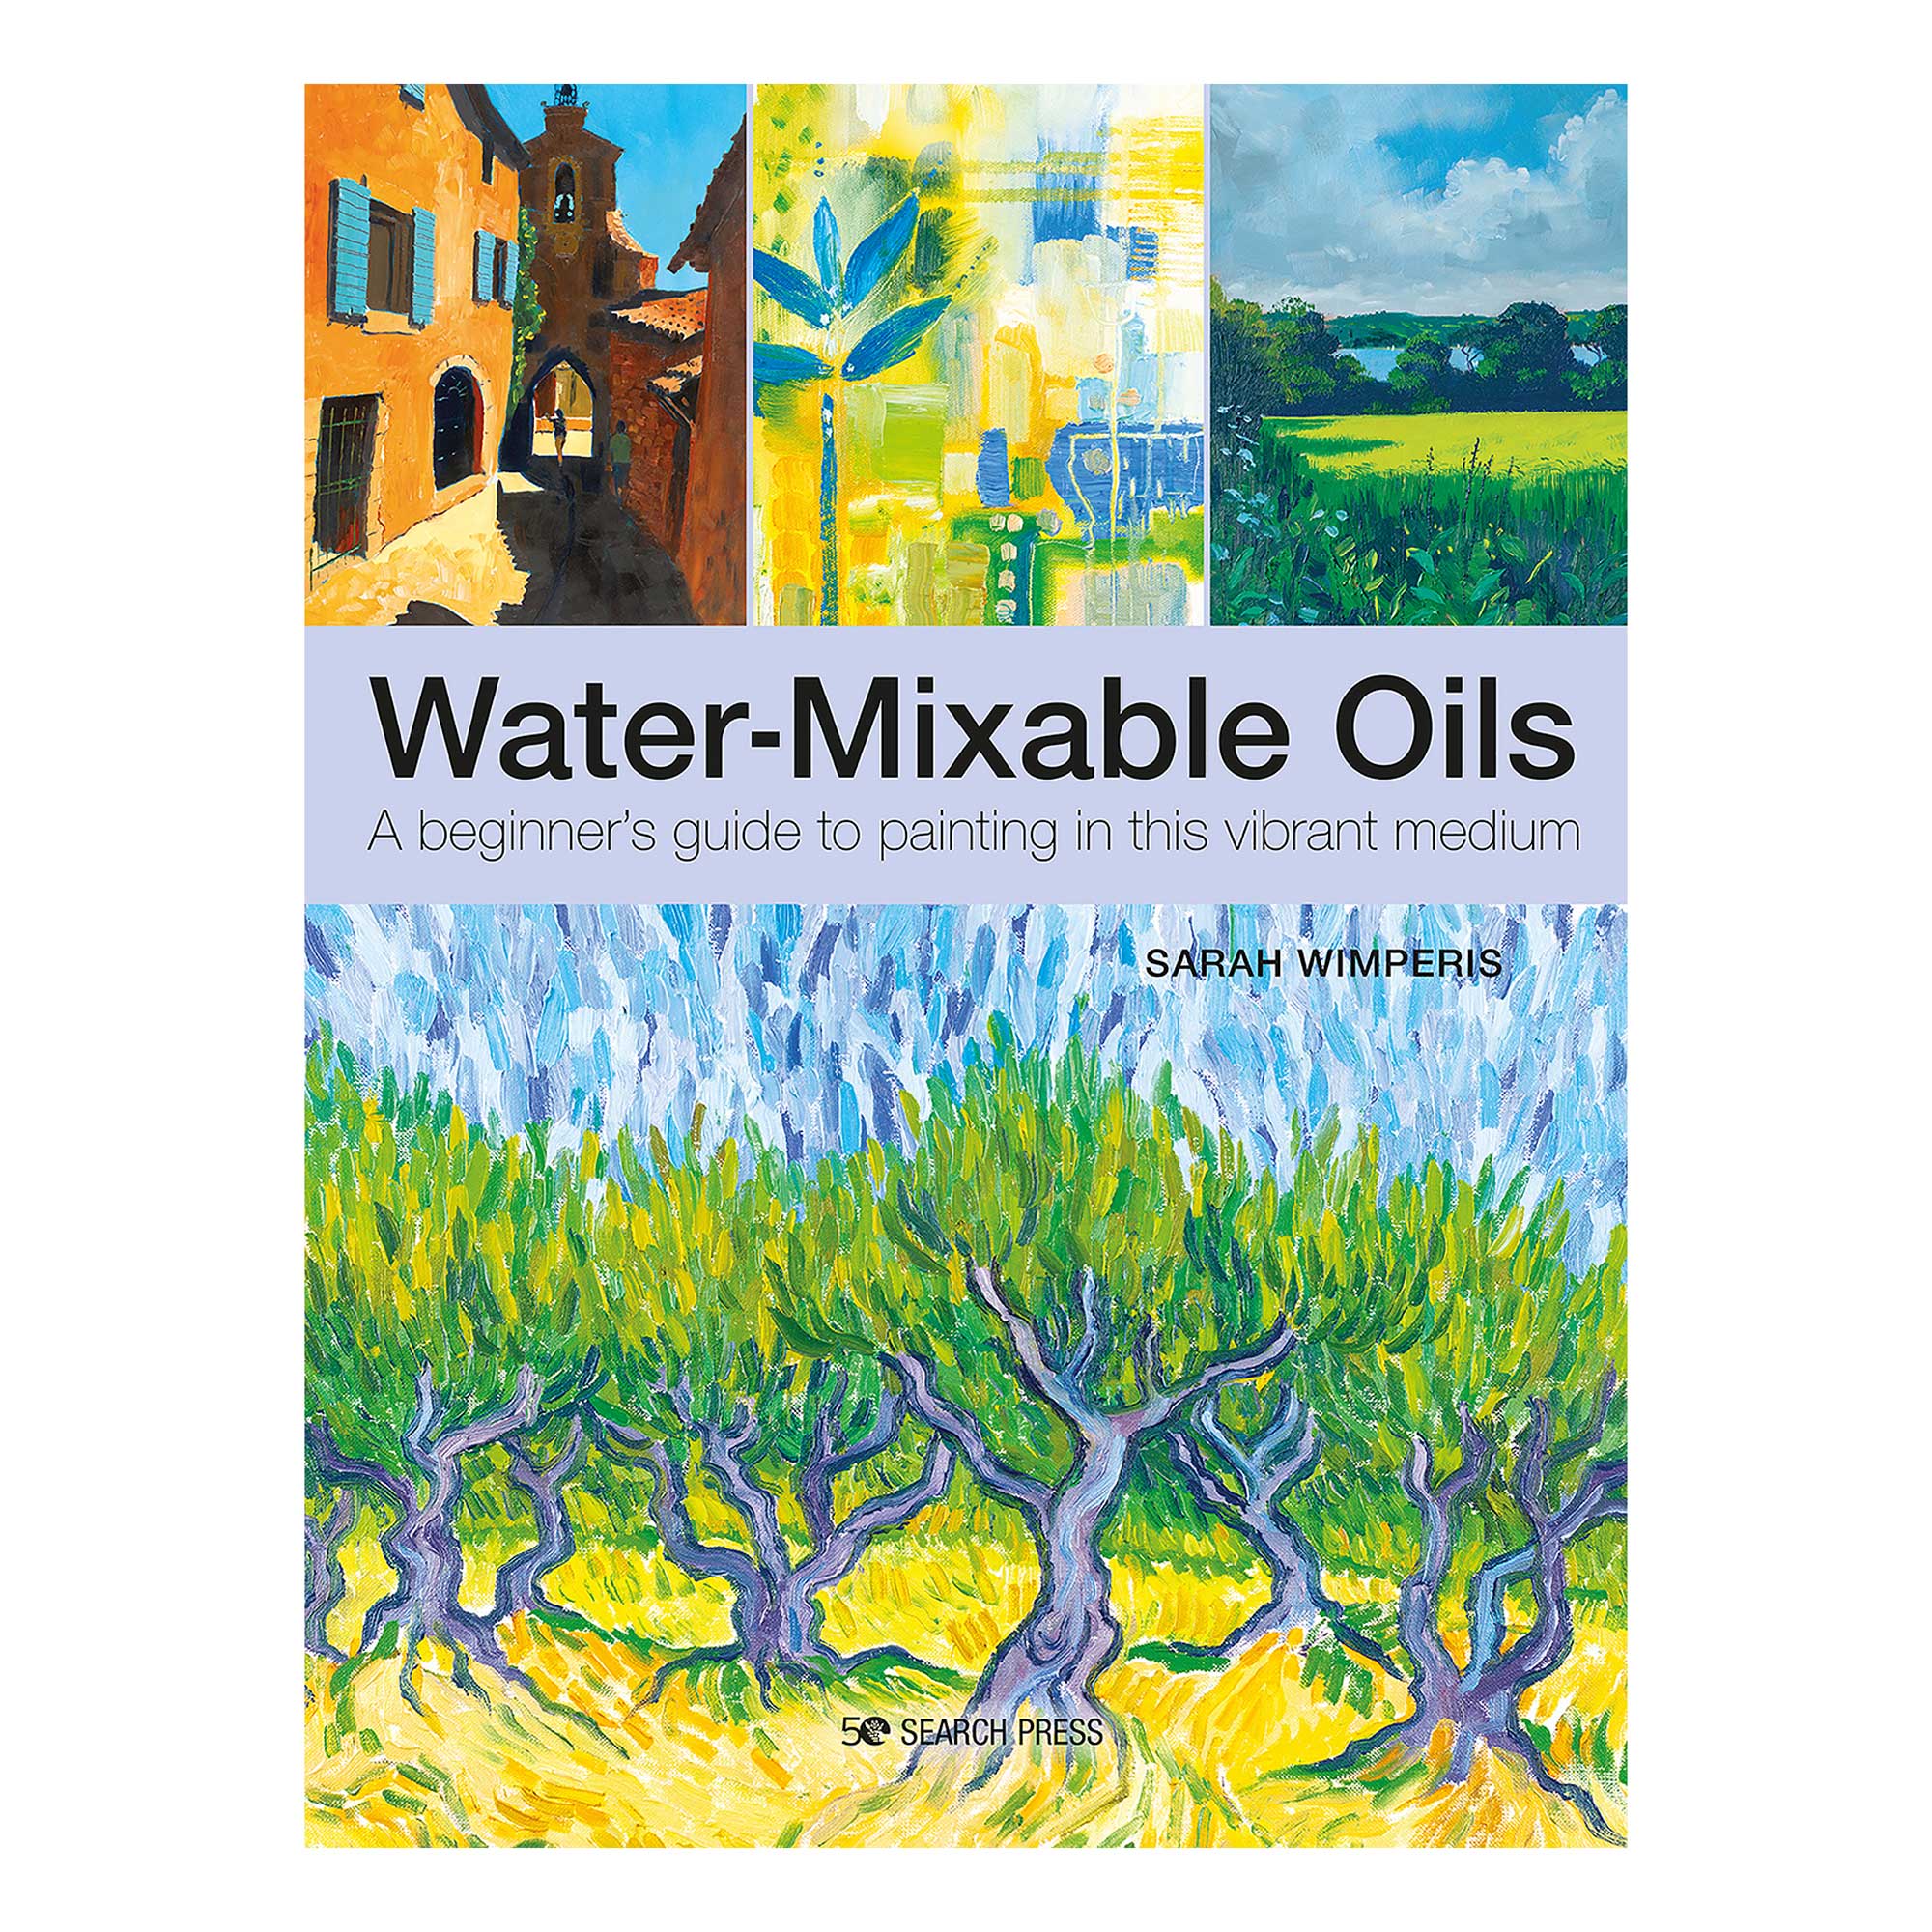 Water-Mixable Oils - S. Wimperis